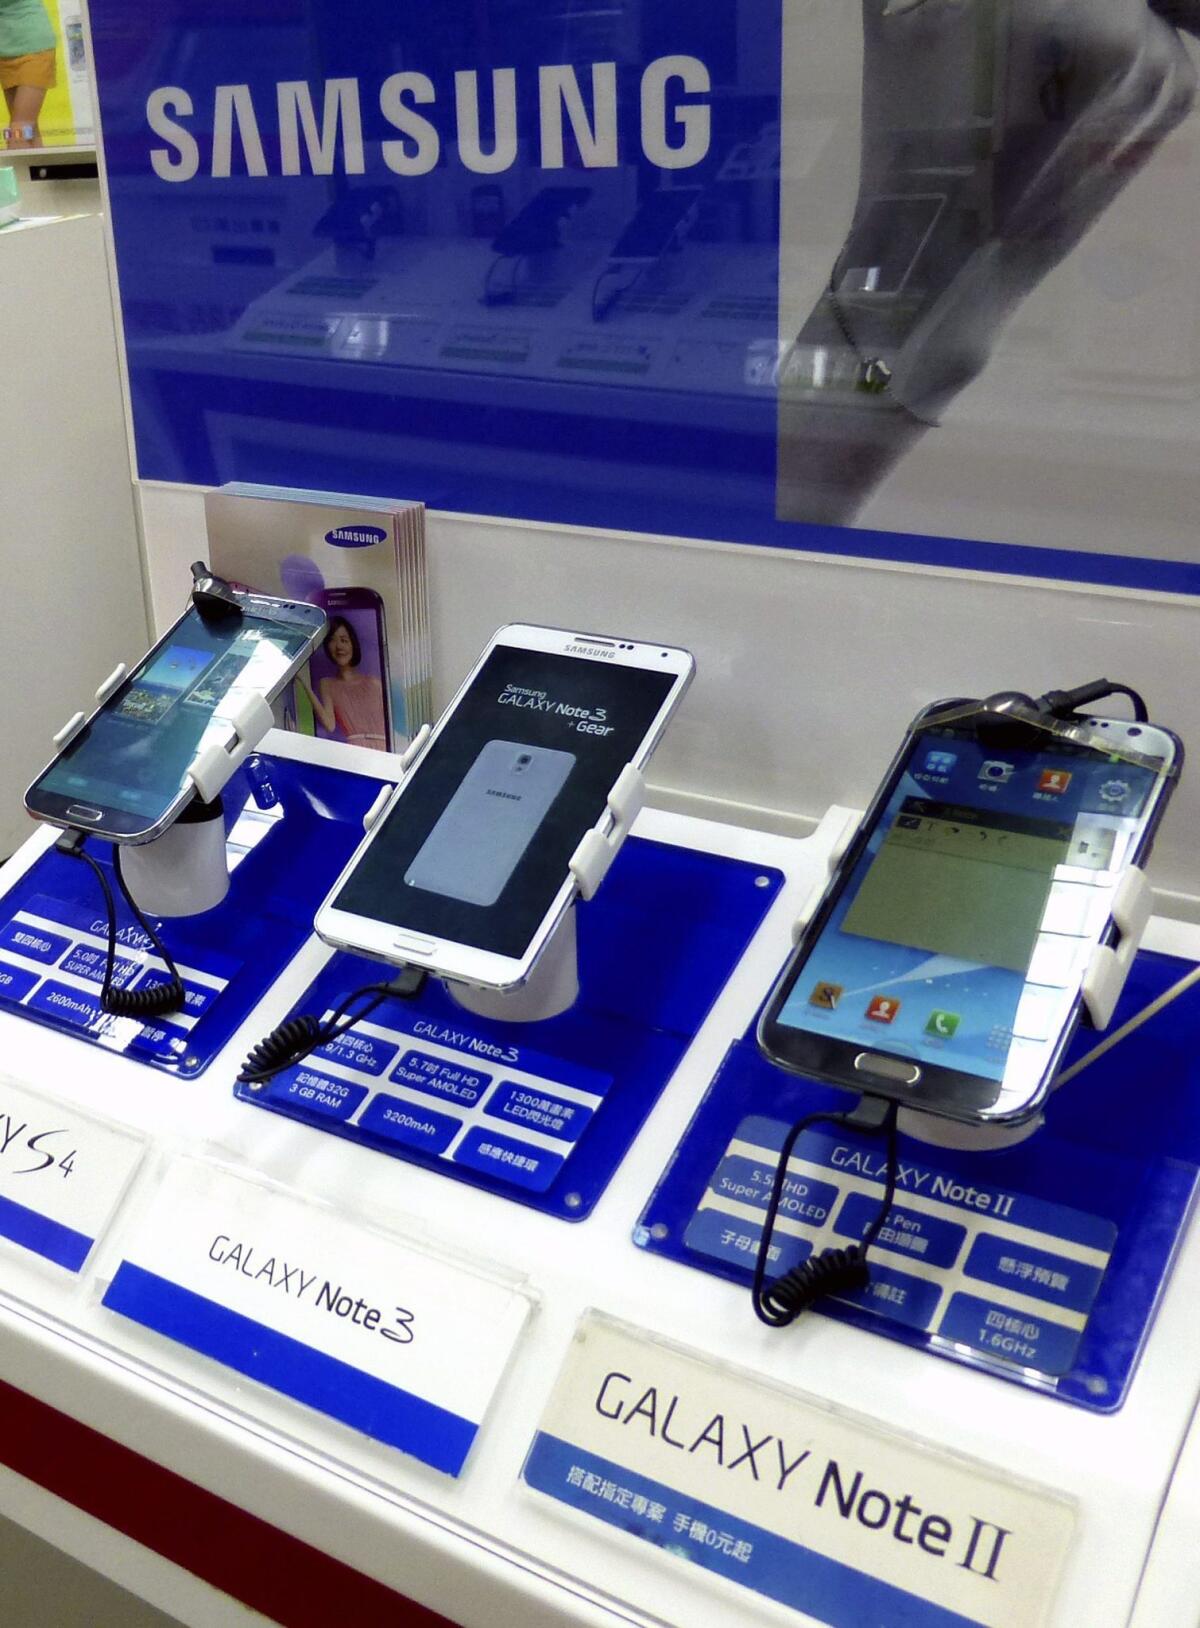 Samsung Galaxy smartphones are displayed at a shop in Taipei, Taiwan.